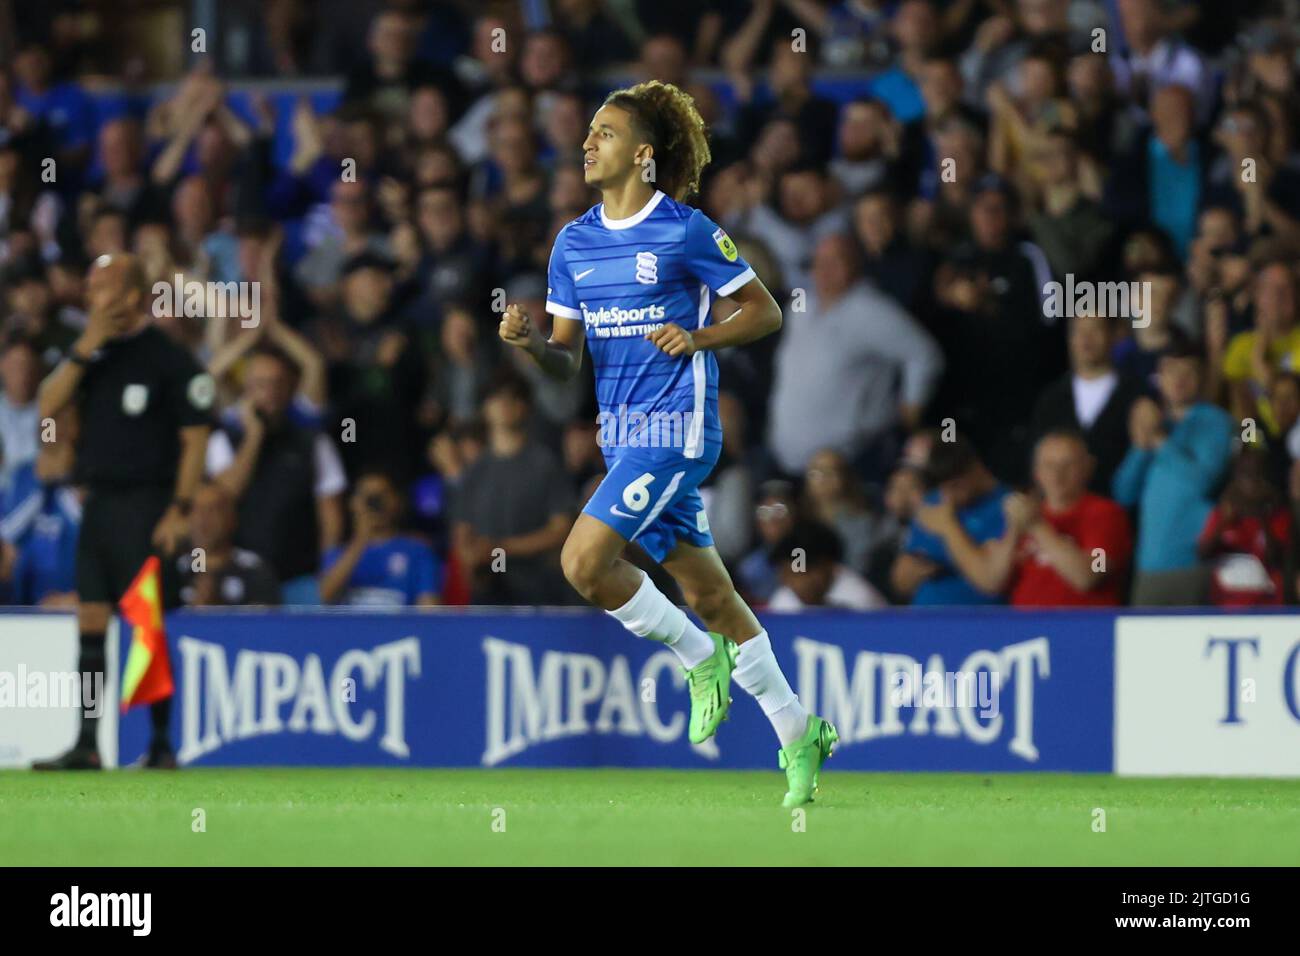 Hannibal Mejbri #6 of Birmingham City  during his debut against Norwich City Stock Photo